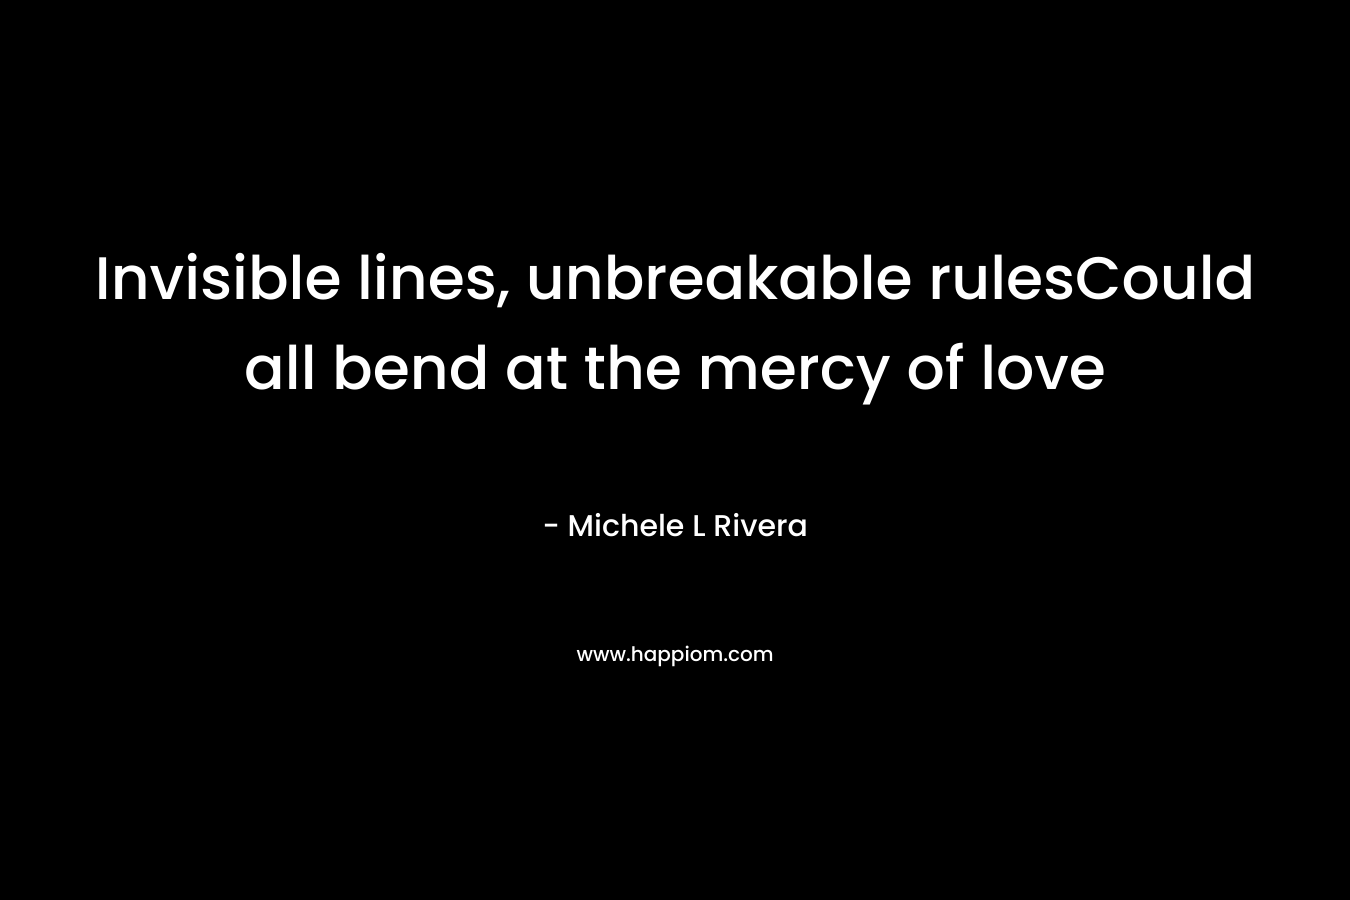 Invisible lines, unbreakable rulesCould all bend at the mercy of love – Michele L Rivera